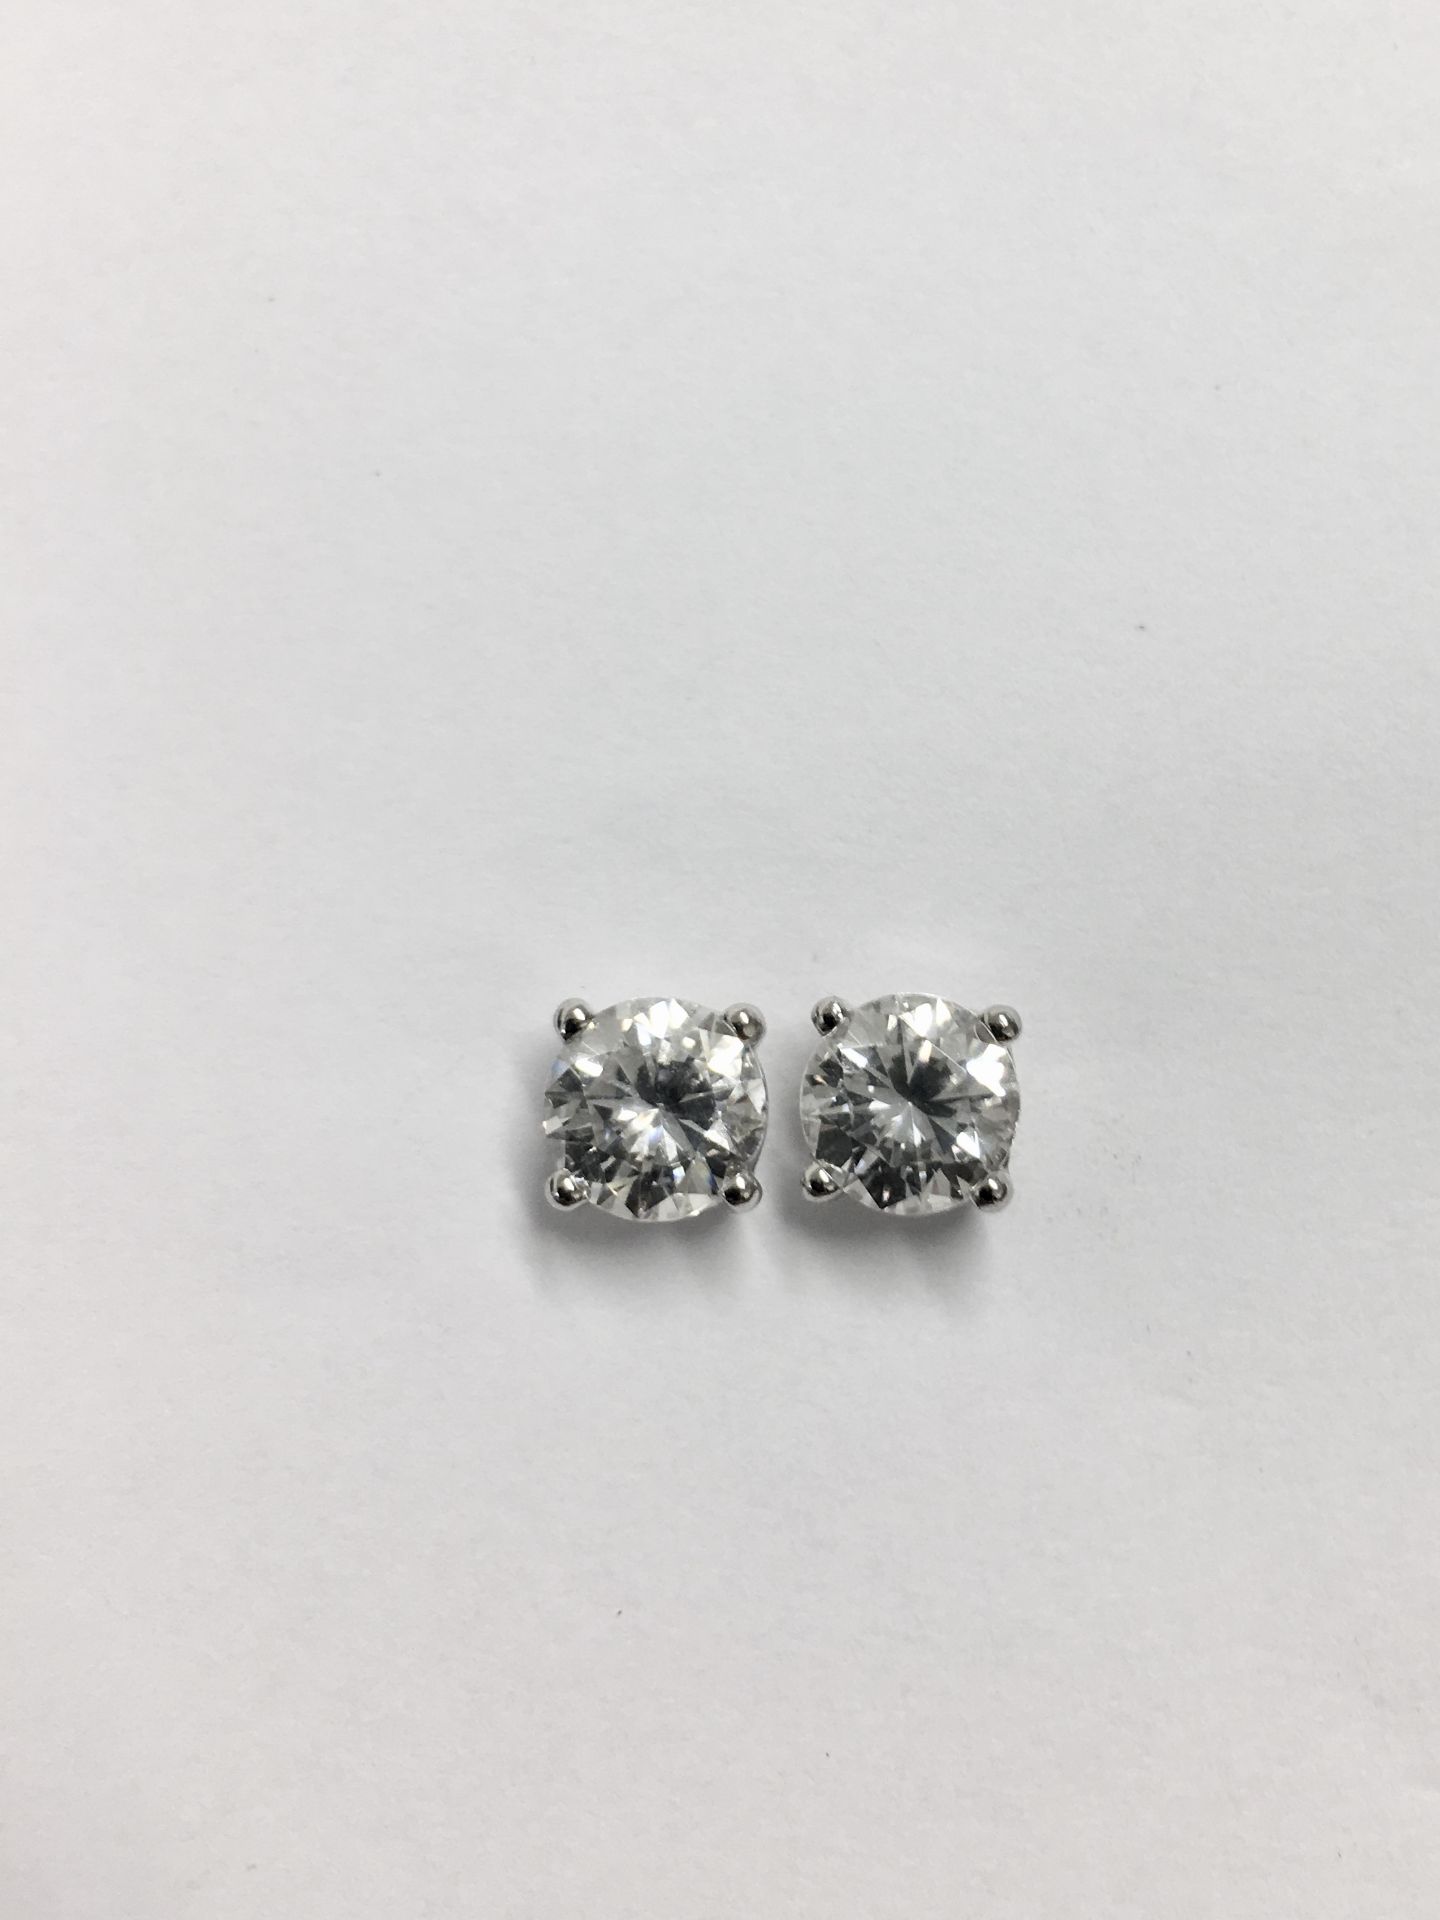 1.20Ct Diamond Solitaire Earrings Set In 18Ct White Gold. - Image 11 of 12